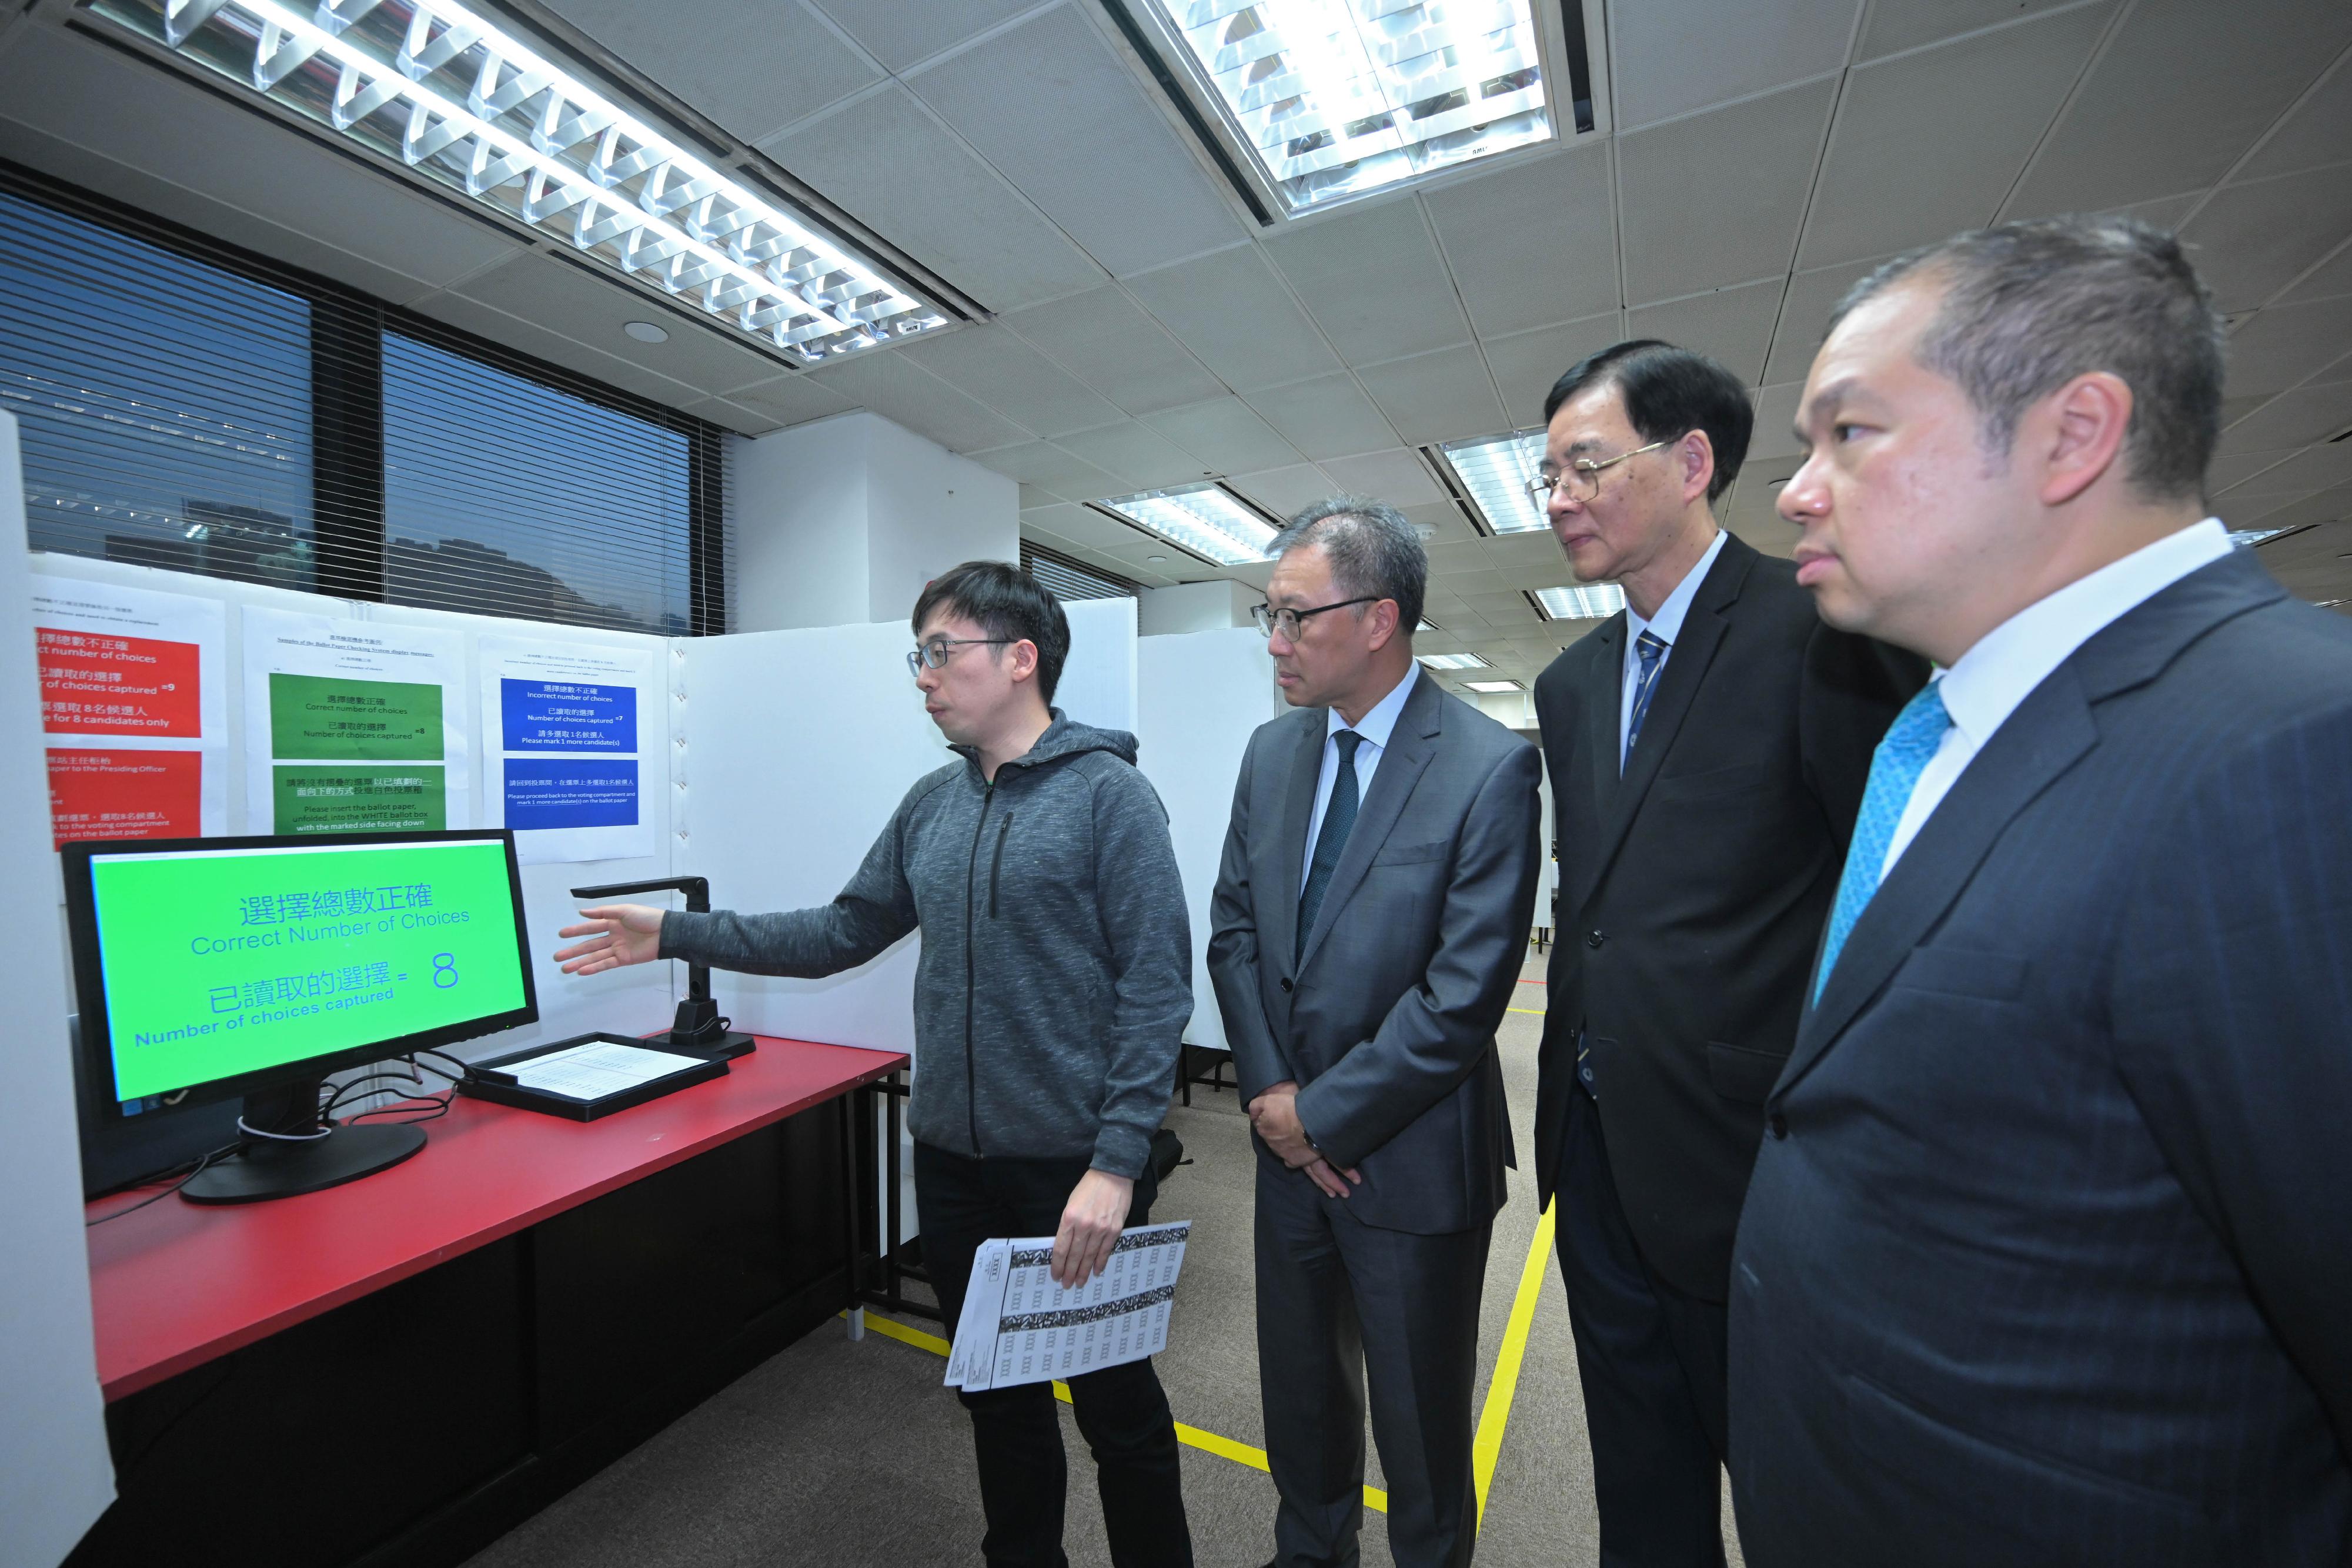 The Chairman of the Electoral Affairs Commission (EAC), Mr Justice David Lok, today (November 23) inspected the demonstration of polling and counting arrangements by the Registration and Electoral Office (REO) for the 2023 District Council Ordinary Election. Photo shows Mr Justice Lok (third right) being briefed by staff of the REO on the ballot paper checking system installed at District Committees constituency polling stations. Also present were the EAC members Professor Daniel Shek (second right) and Mr Bernard Man, SC (first right).